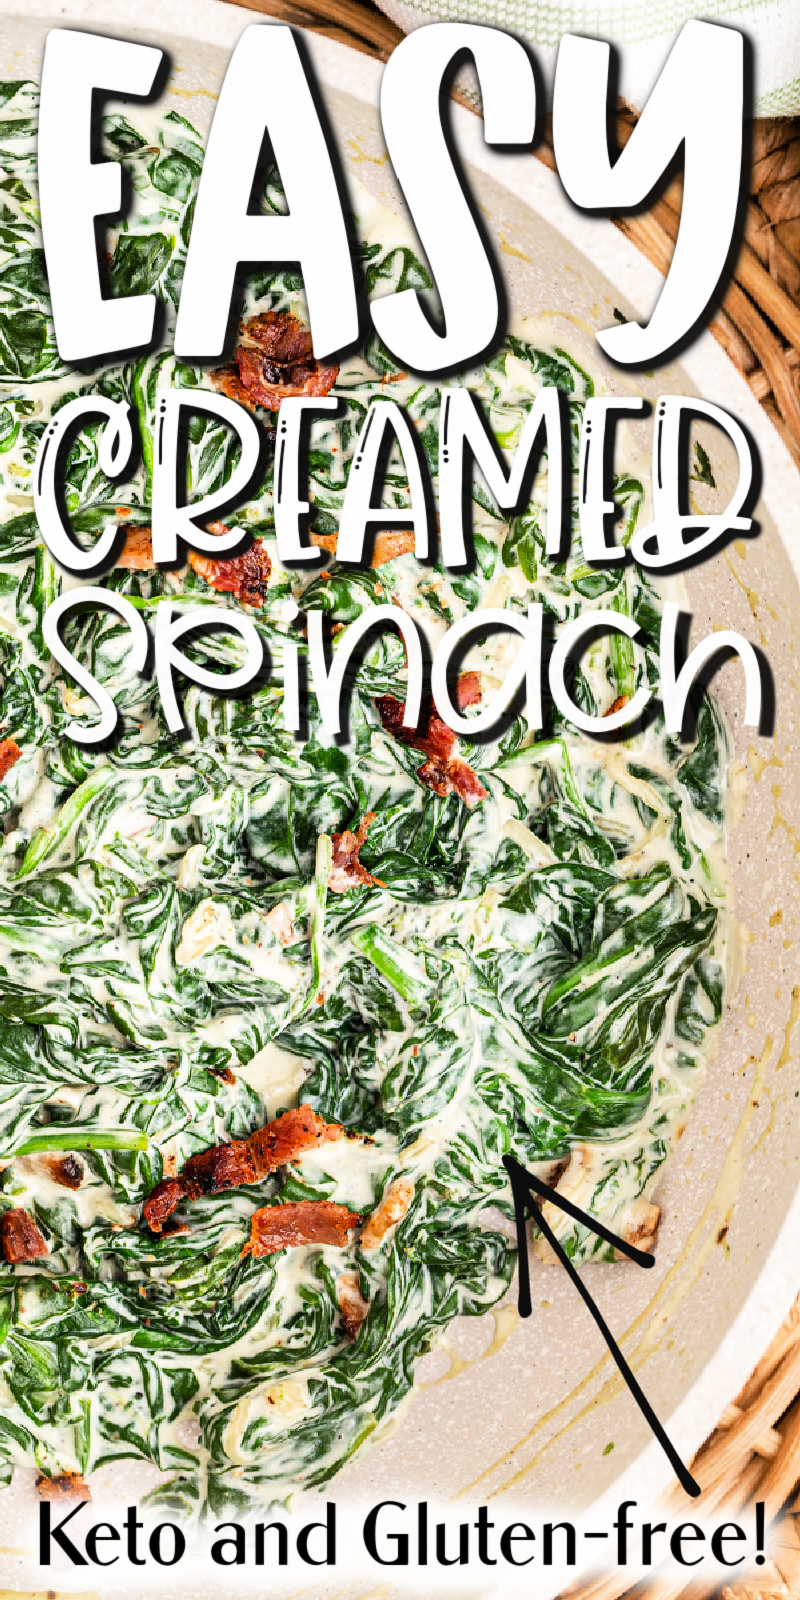 Easy Creamed Spinach - This easy creamed spinach recipe uses fresh spinach, creamed cheese, bacon, and Parmesan cheese to recreate the steak house classic at home. It is low carb, and gluten-free, and a dish the whole family will love, kids too! #keto #lowcarb #glutenfree #easy #creamed #spinach #sidedish #side #recipe